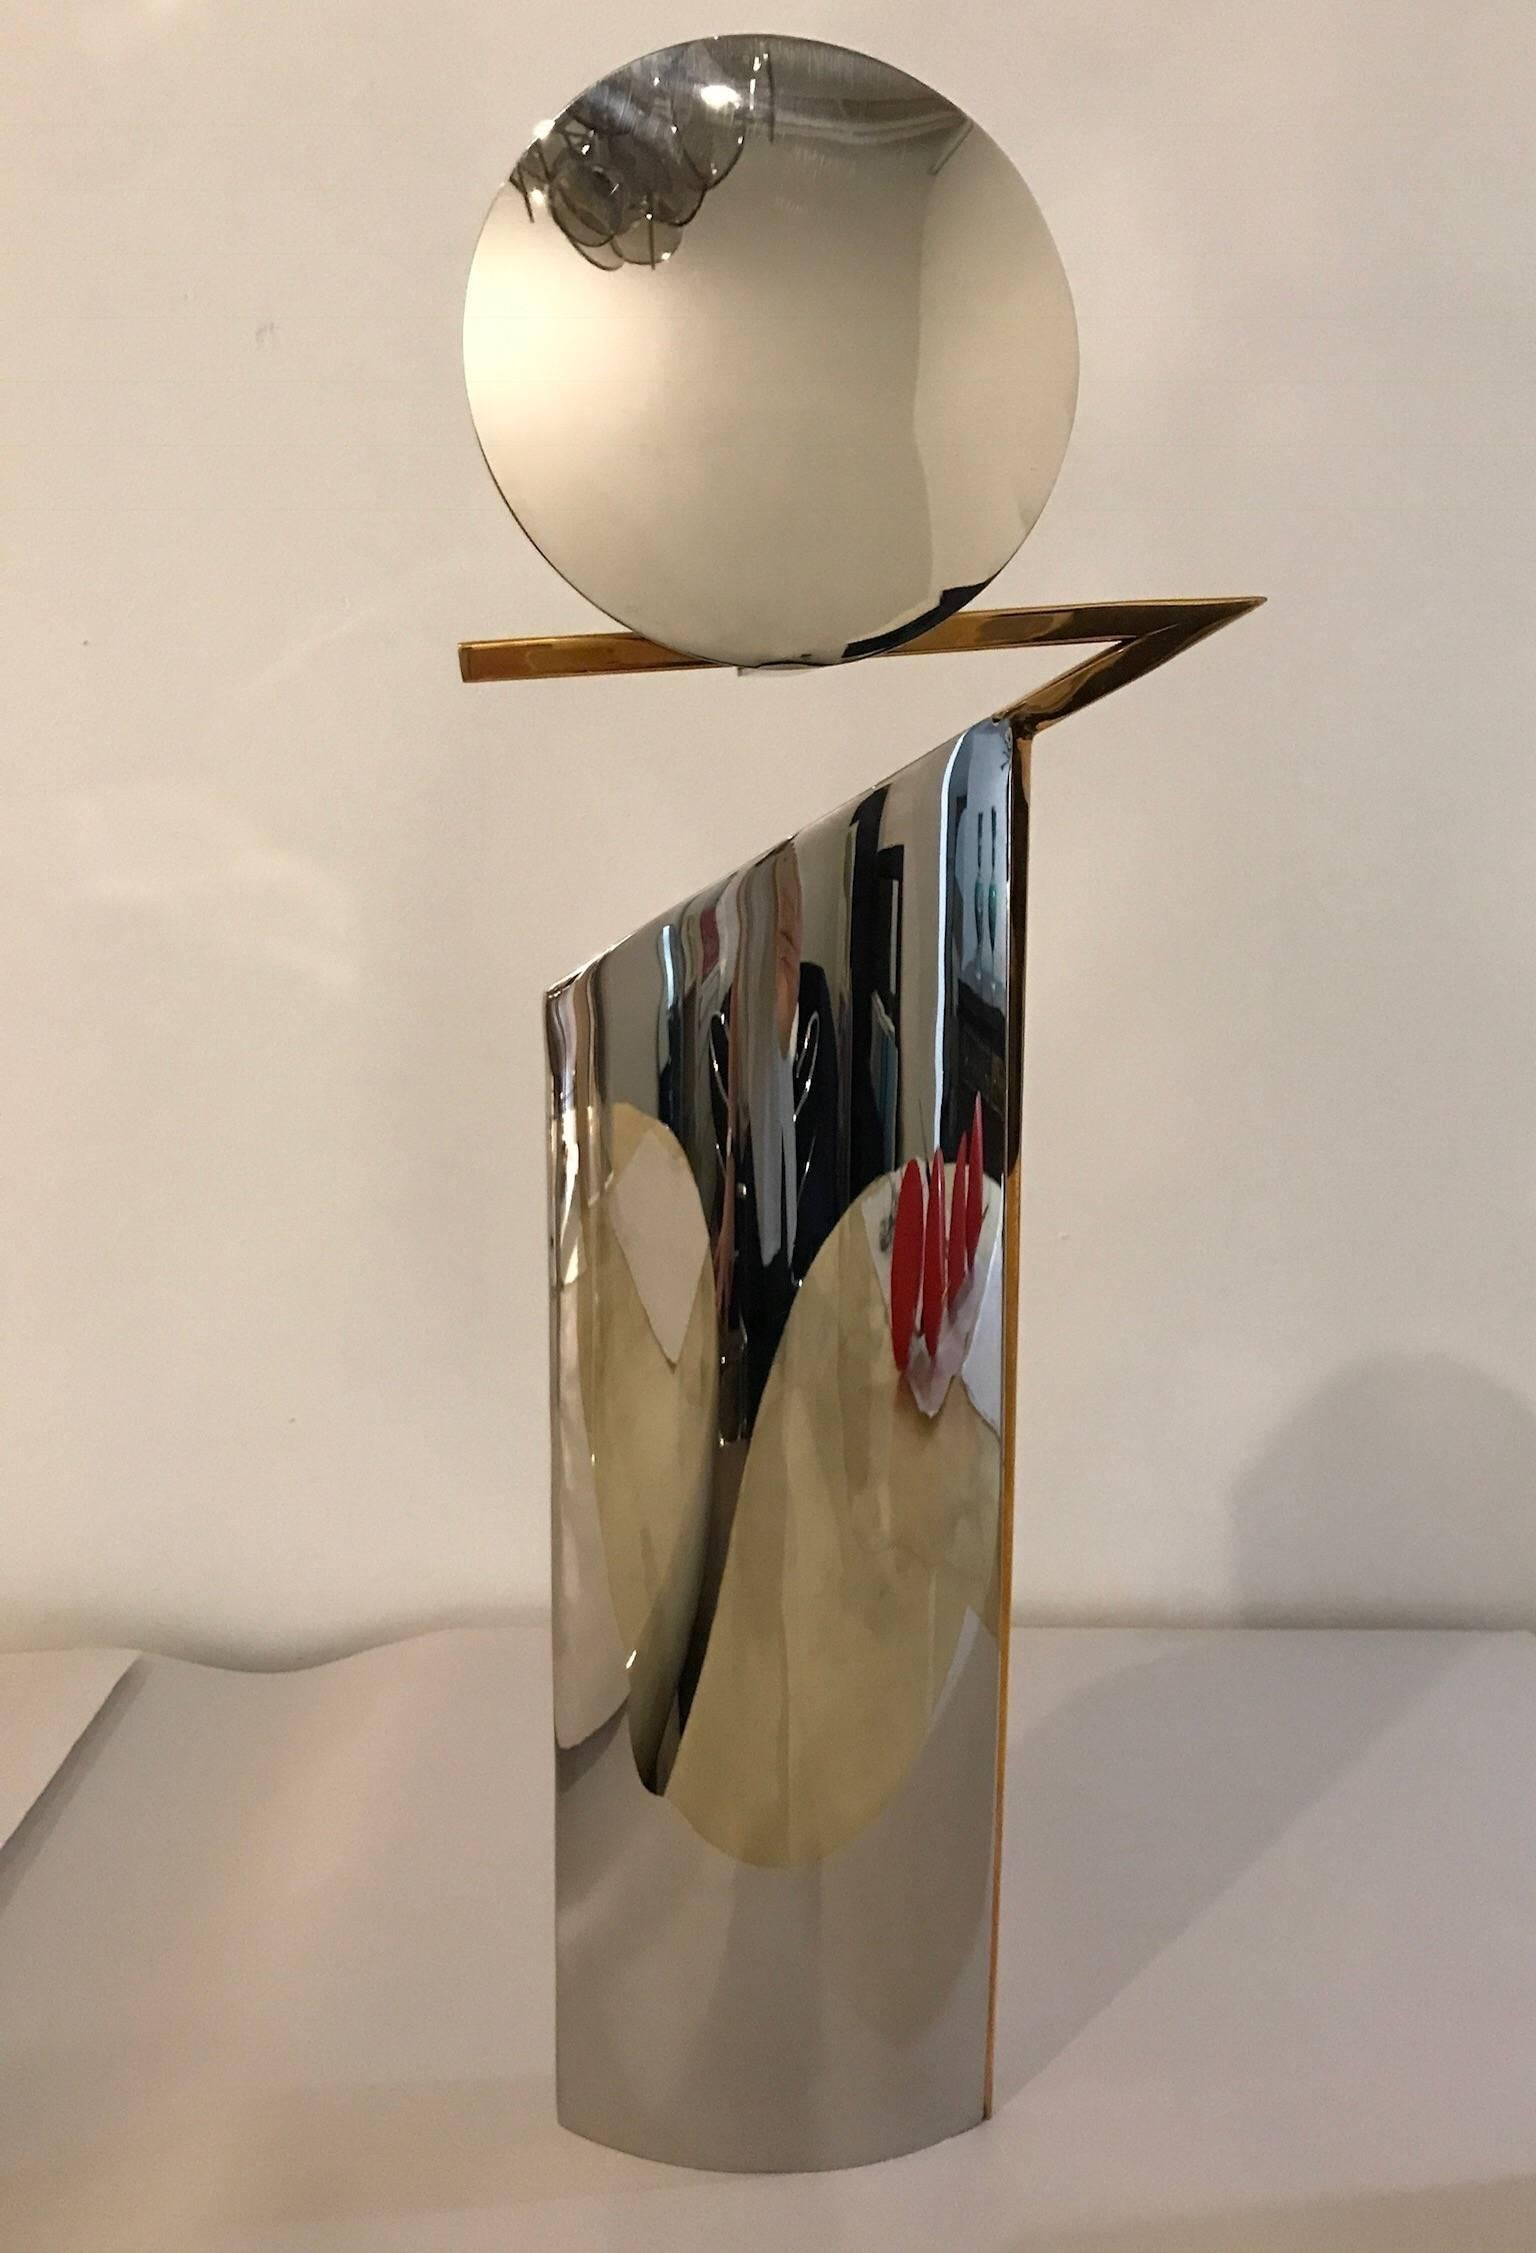 Offered is a Mid-Century Modern Italian set of three graduating size chrome and brass candlestick holders in the style of Lino Sabattini. This set is elegant yet right on trend for today's decor. The set is sleek and sculptural and looks fabulous in